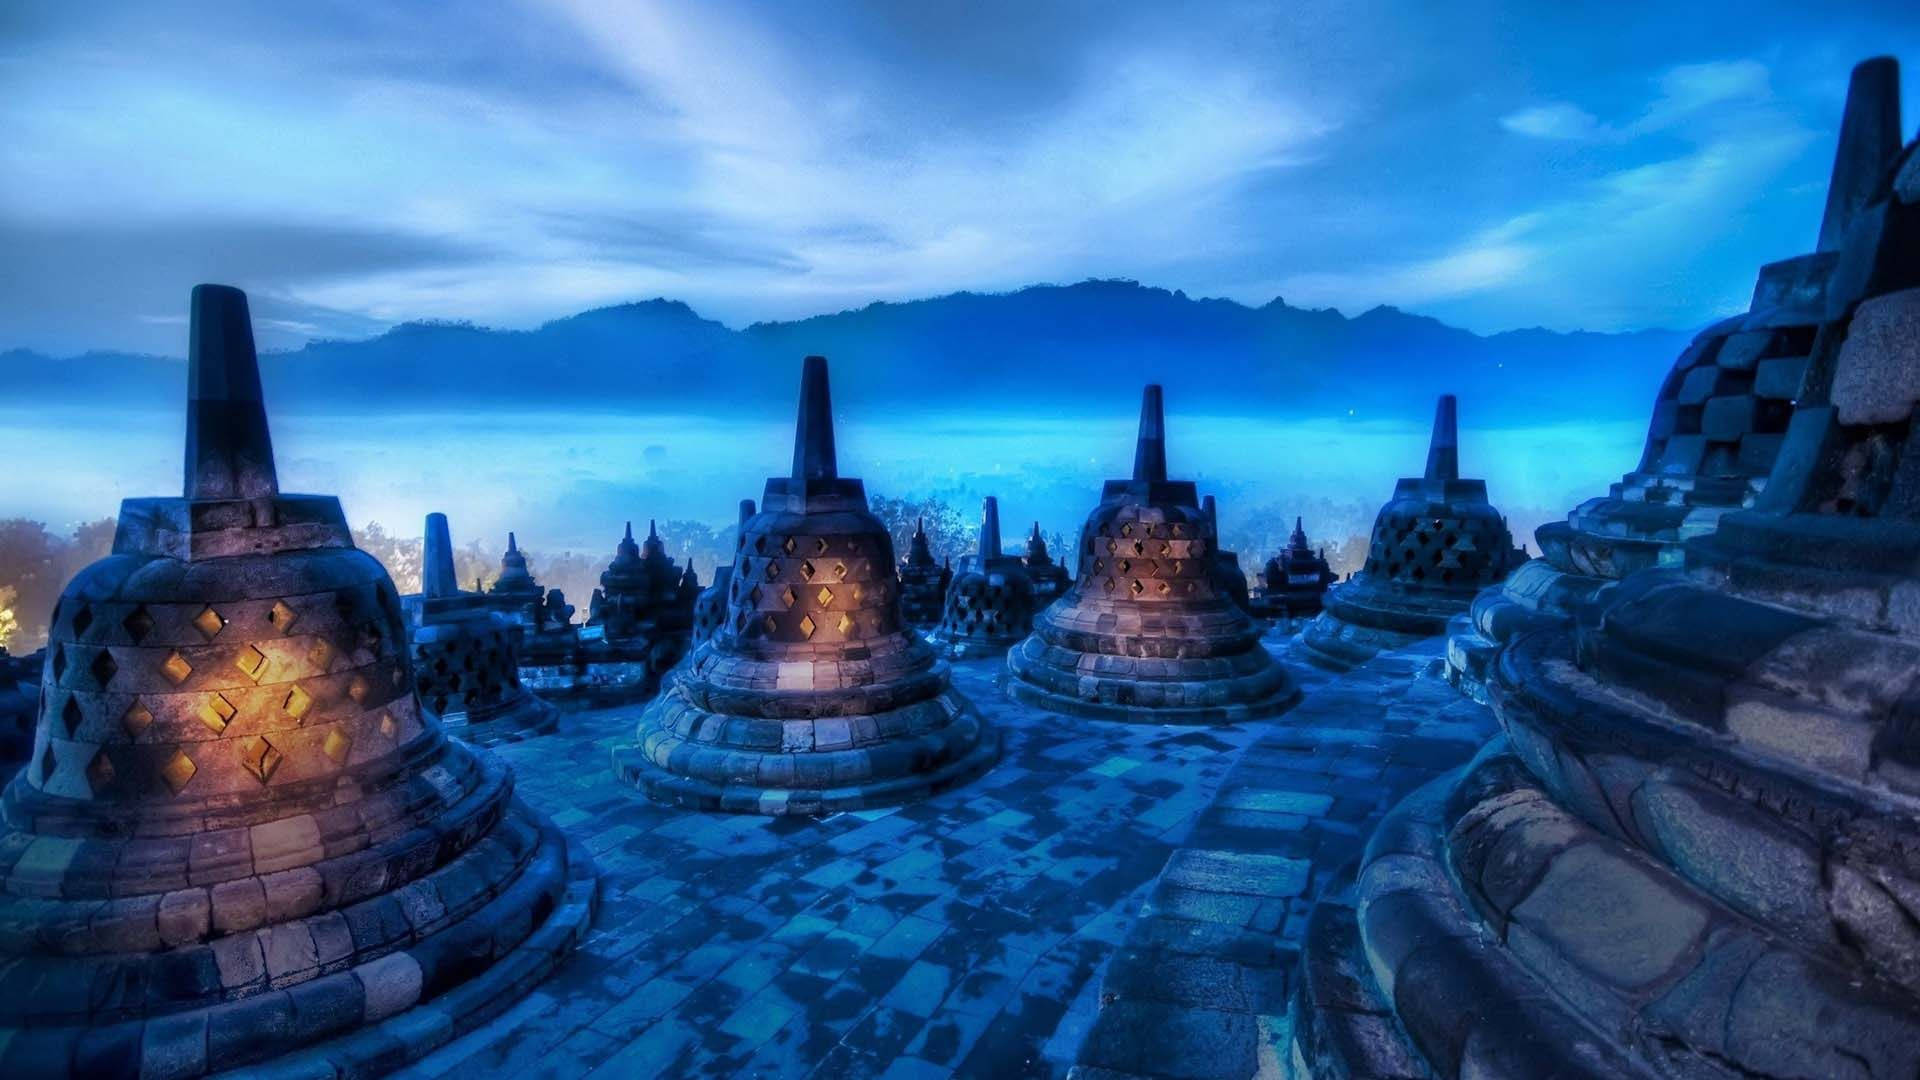 Borobudur Temple At Night With Fog And Mountains Wallpaper